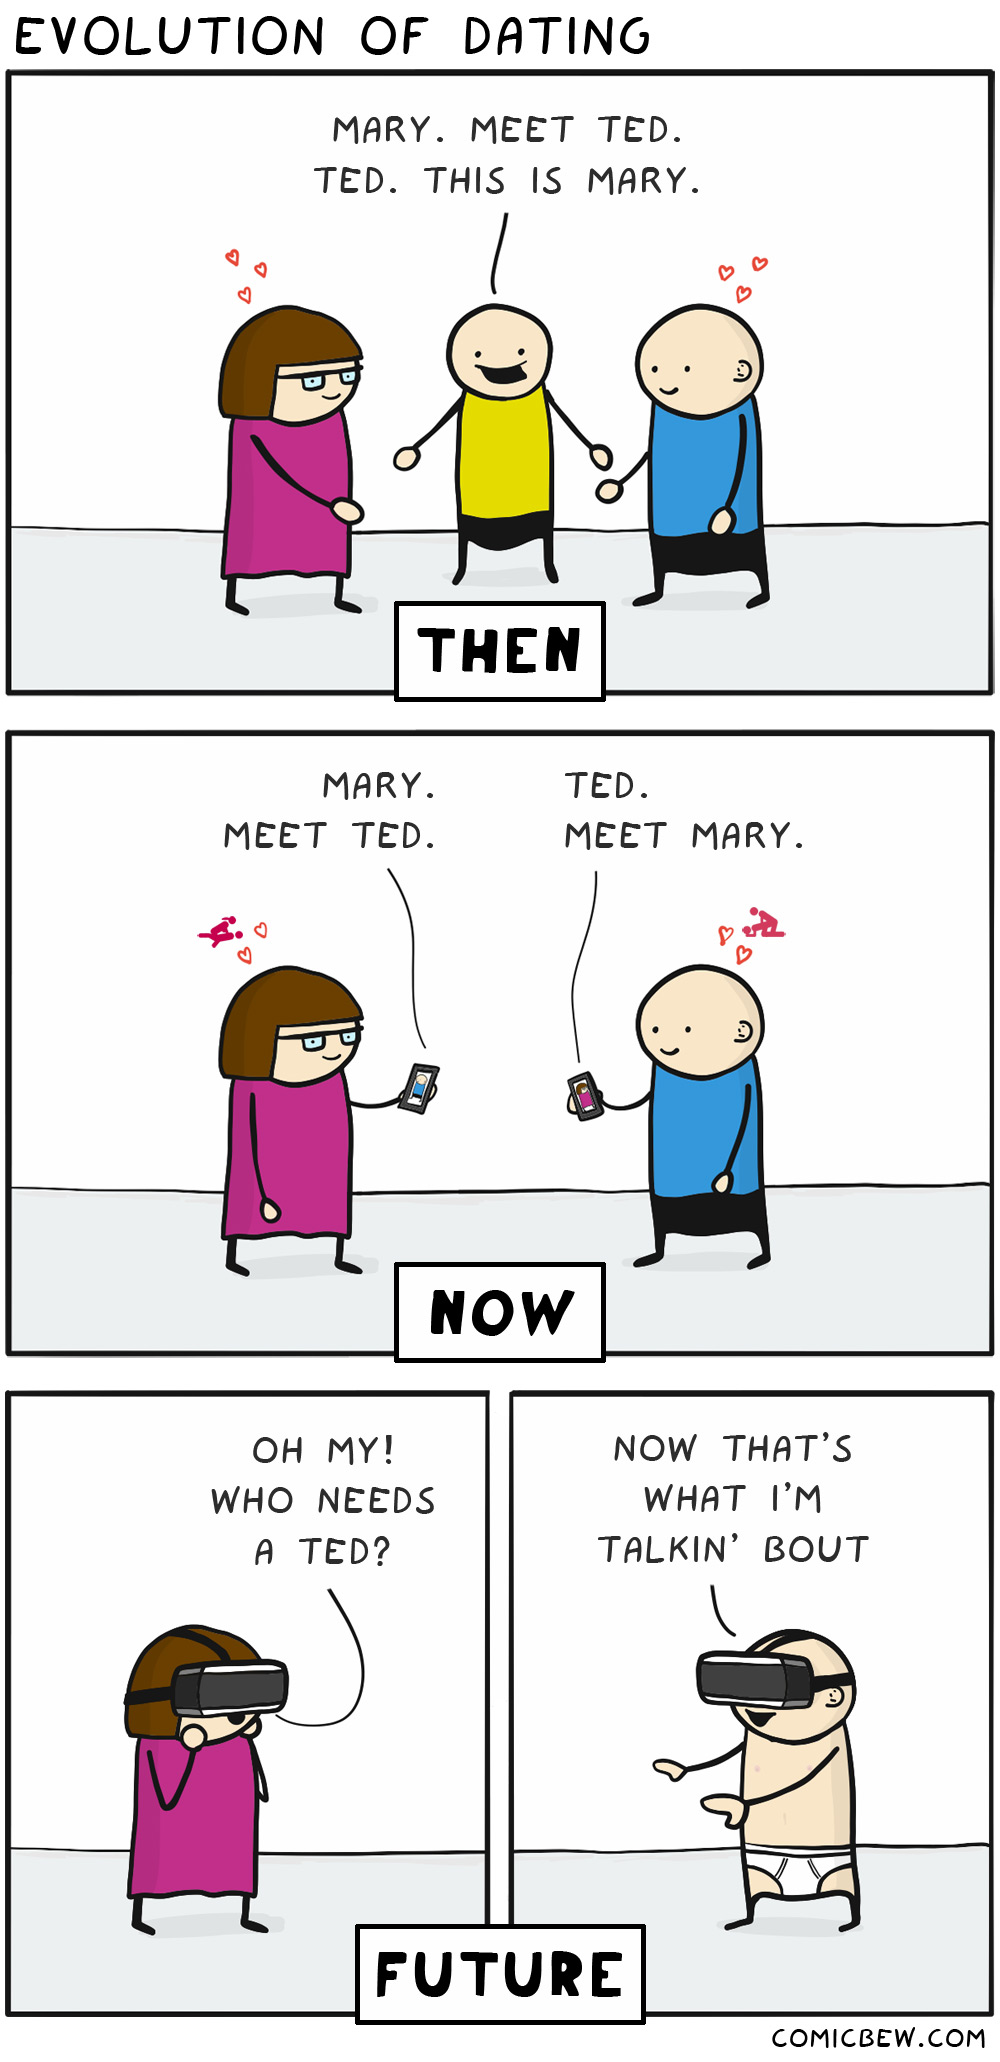 Evolution of Dating - A Comic — Steemit